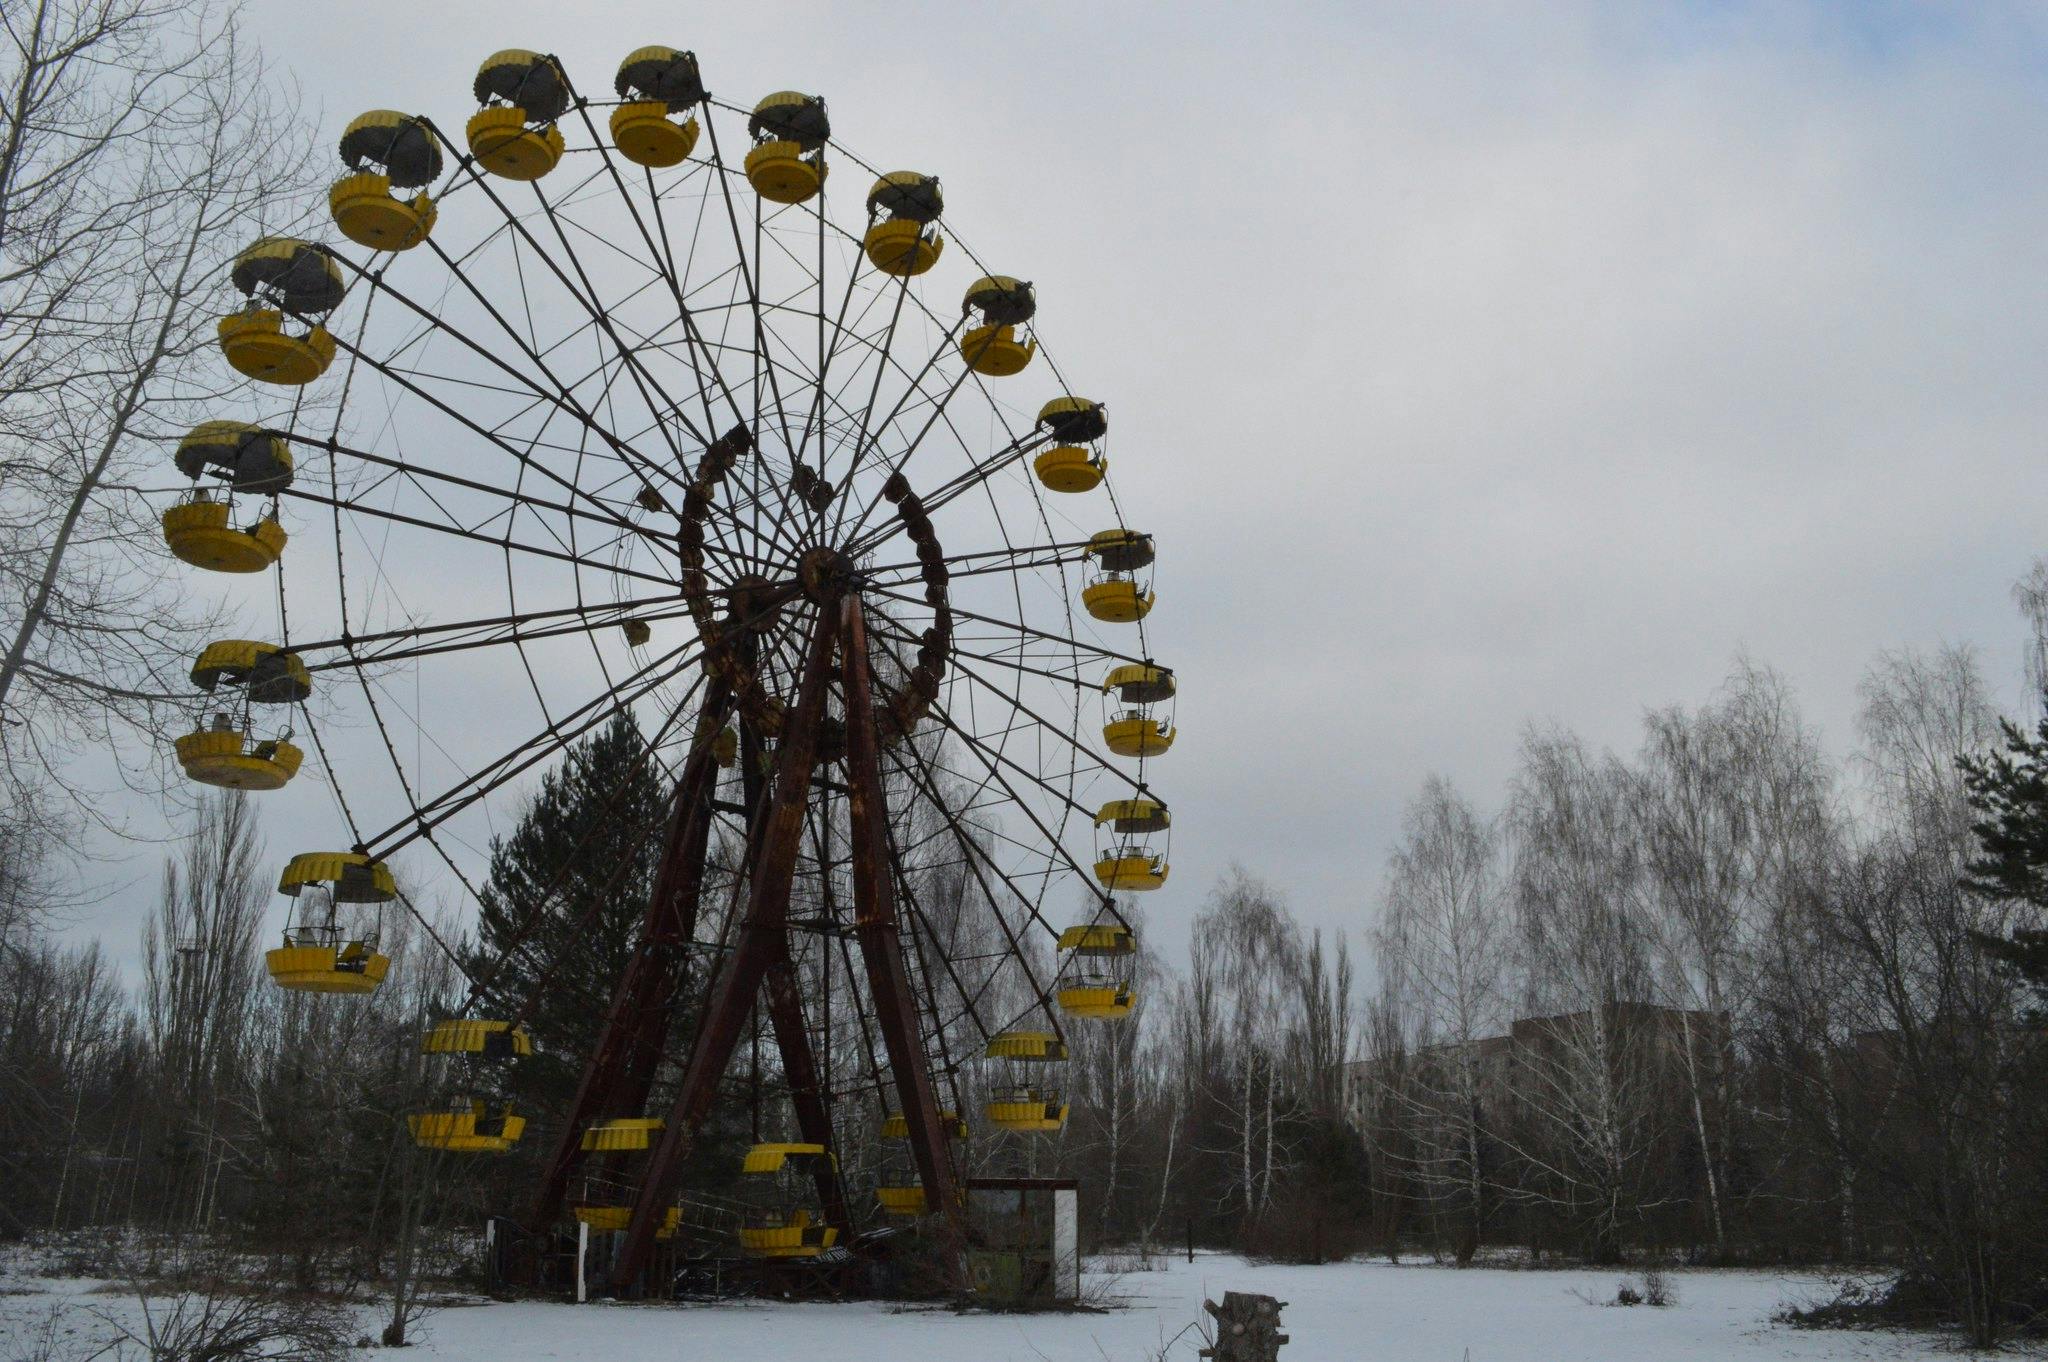 What Was The Chernobyl Disaster?